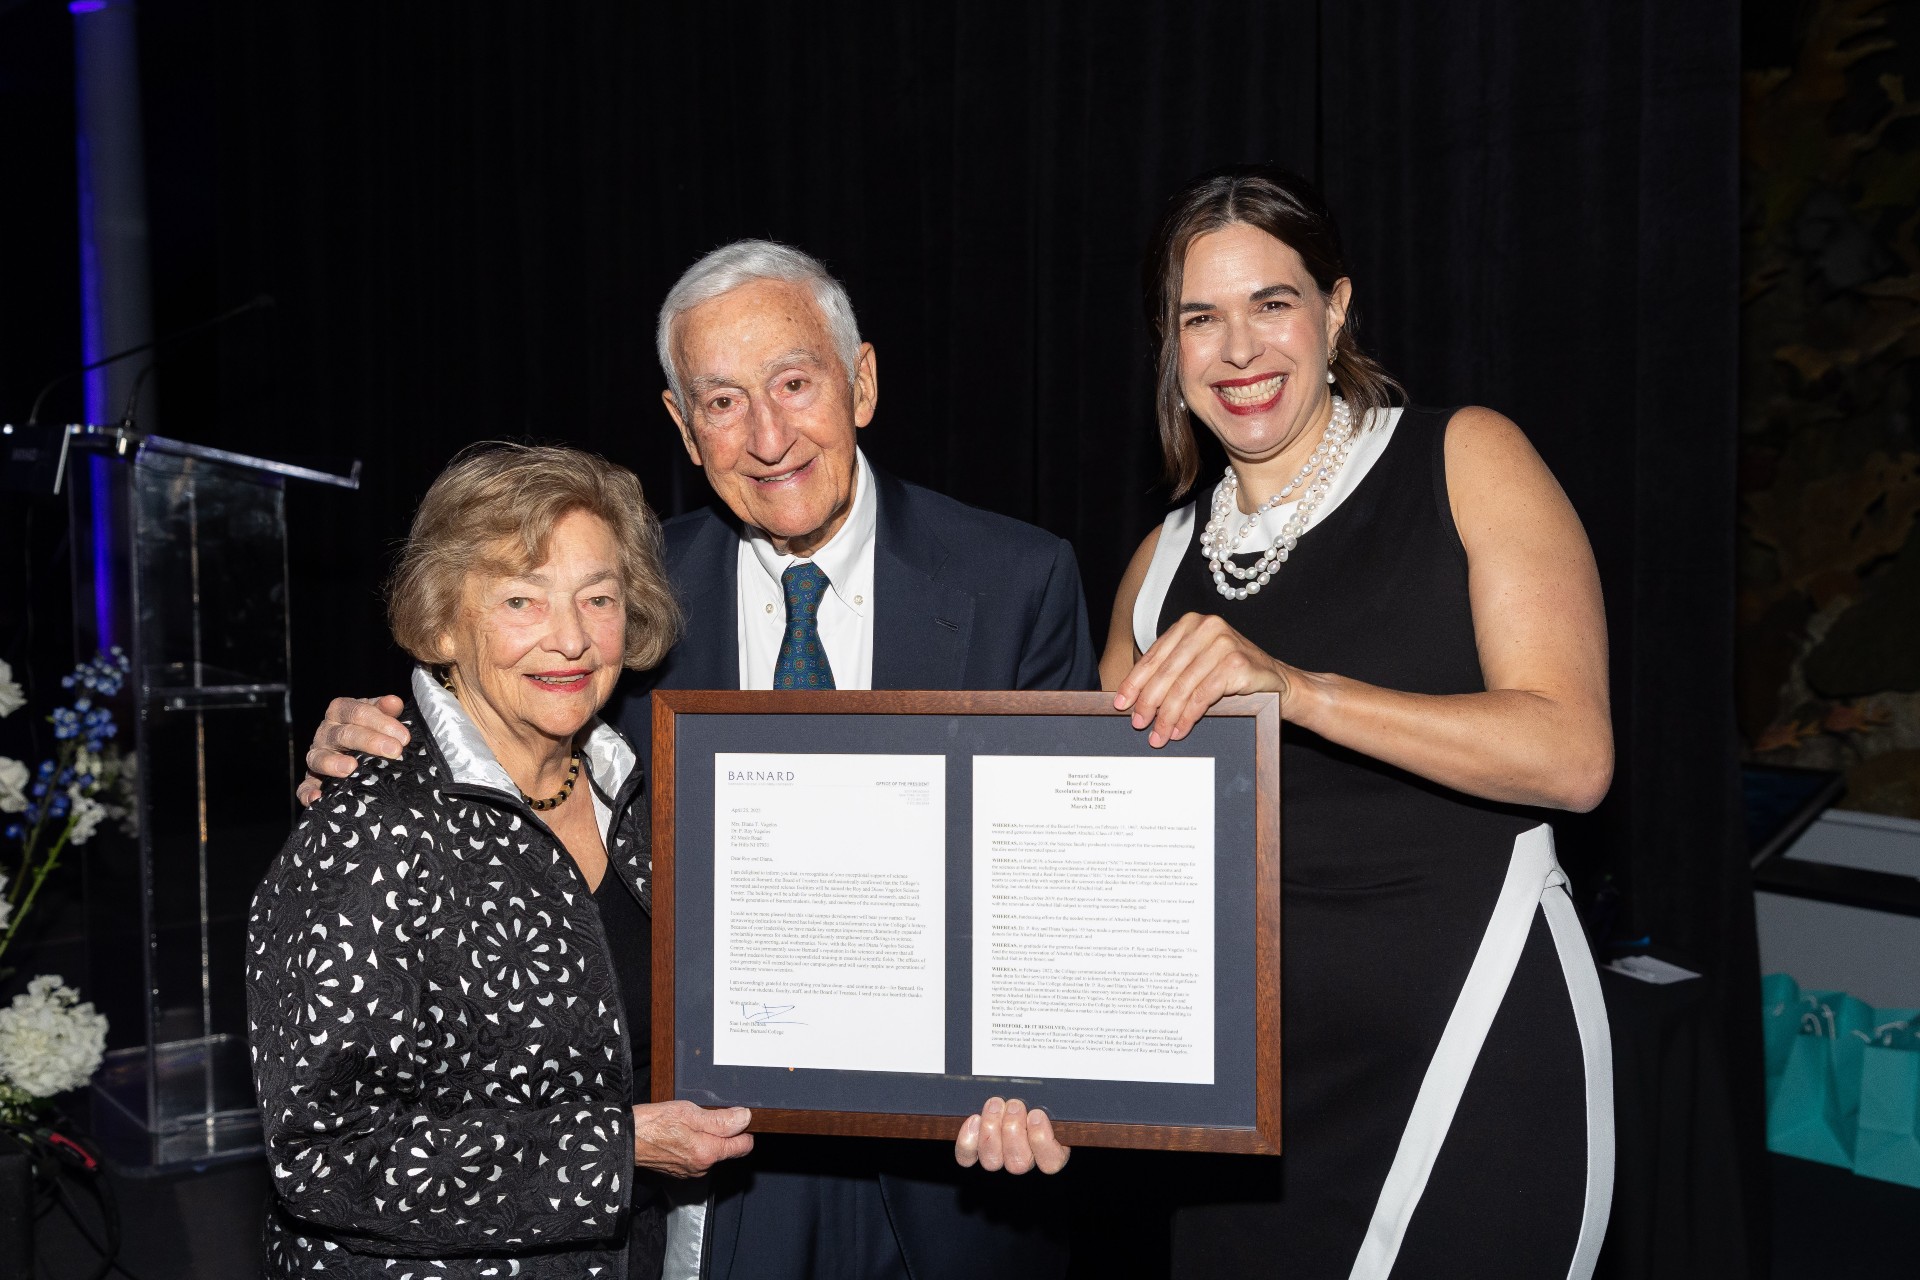 Diana and P. Roy Vagelos with President Beilock